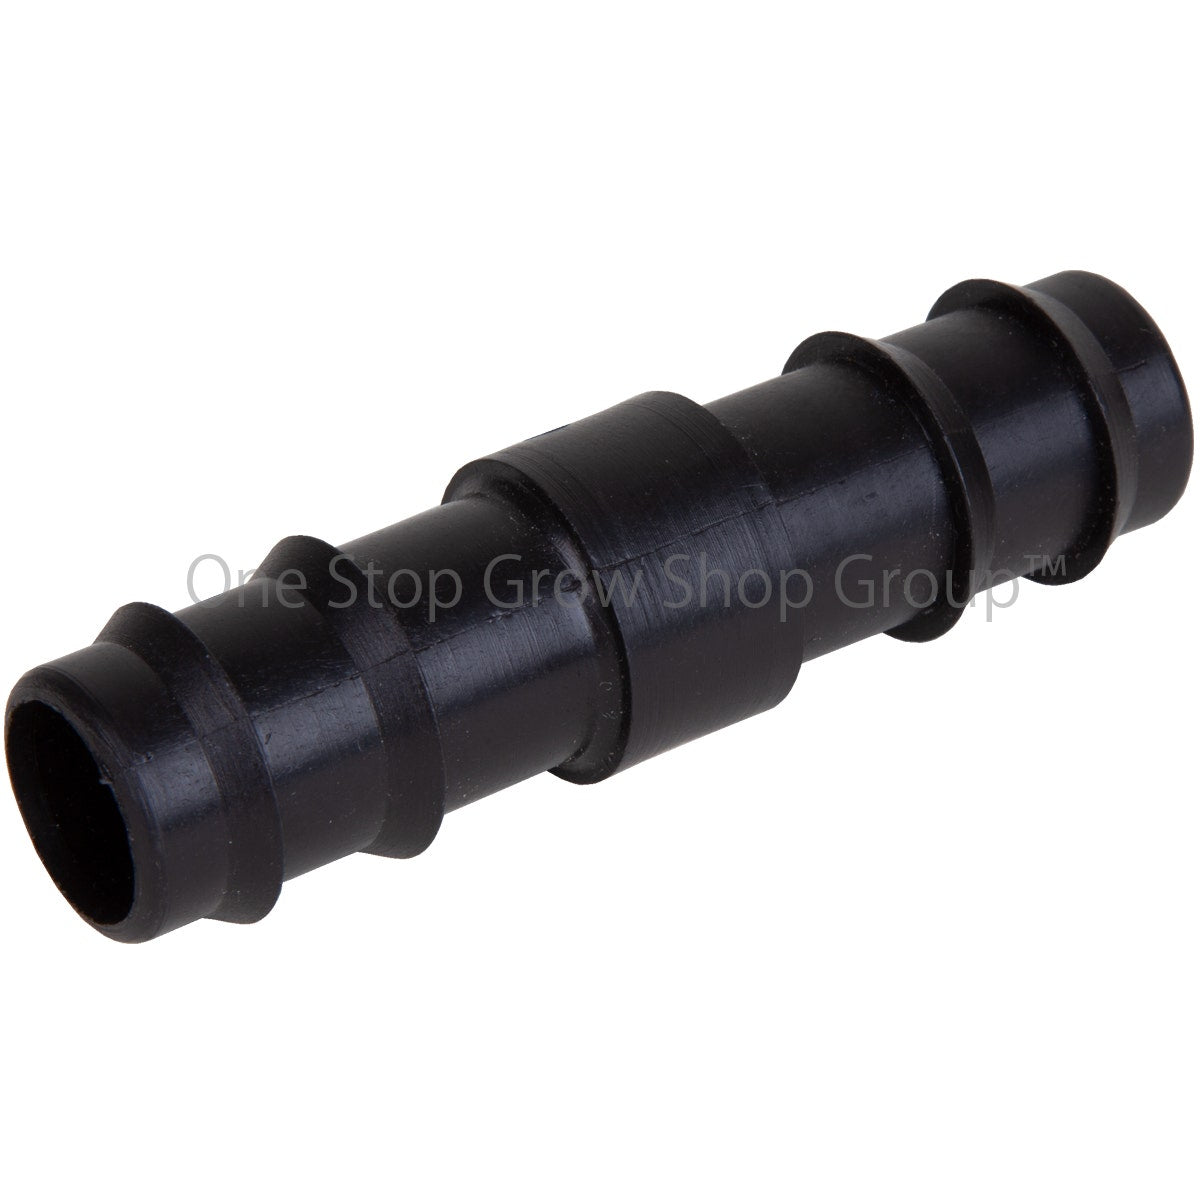 19mm Barbed Irrigation Fittings